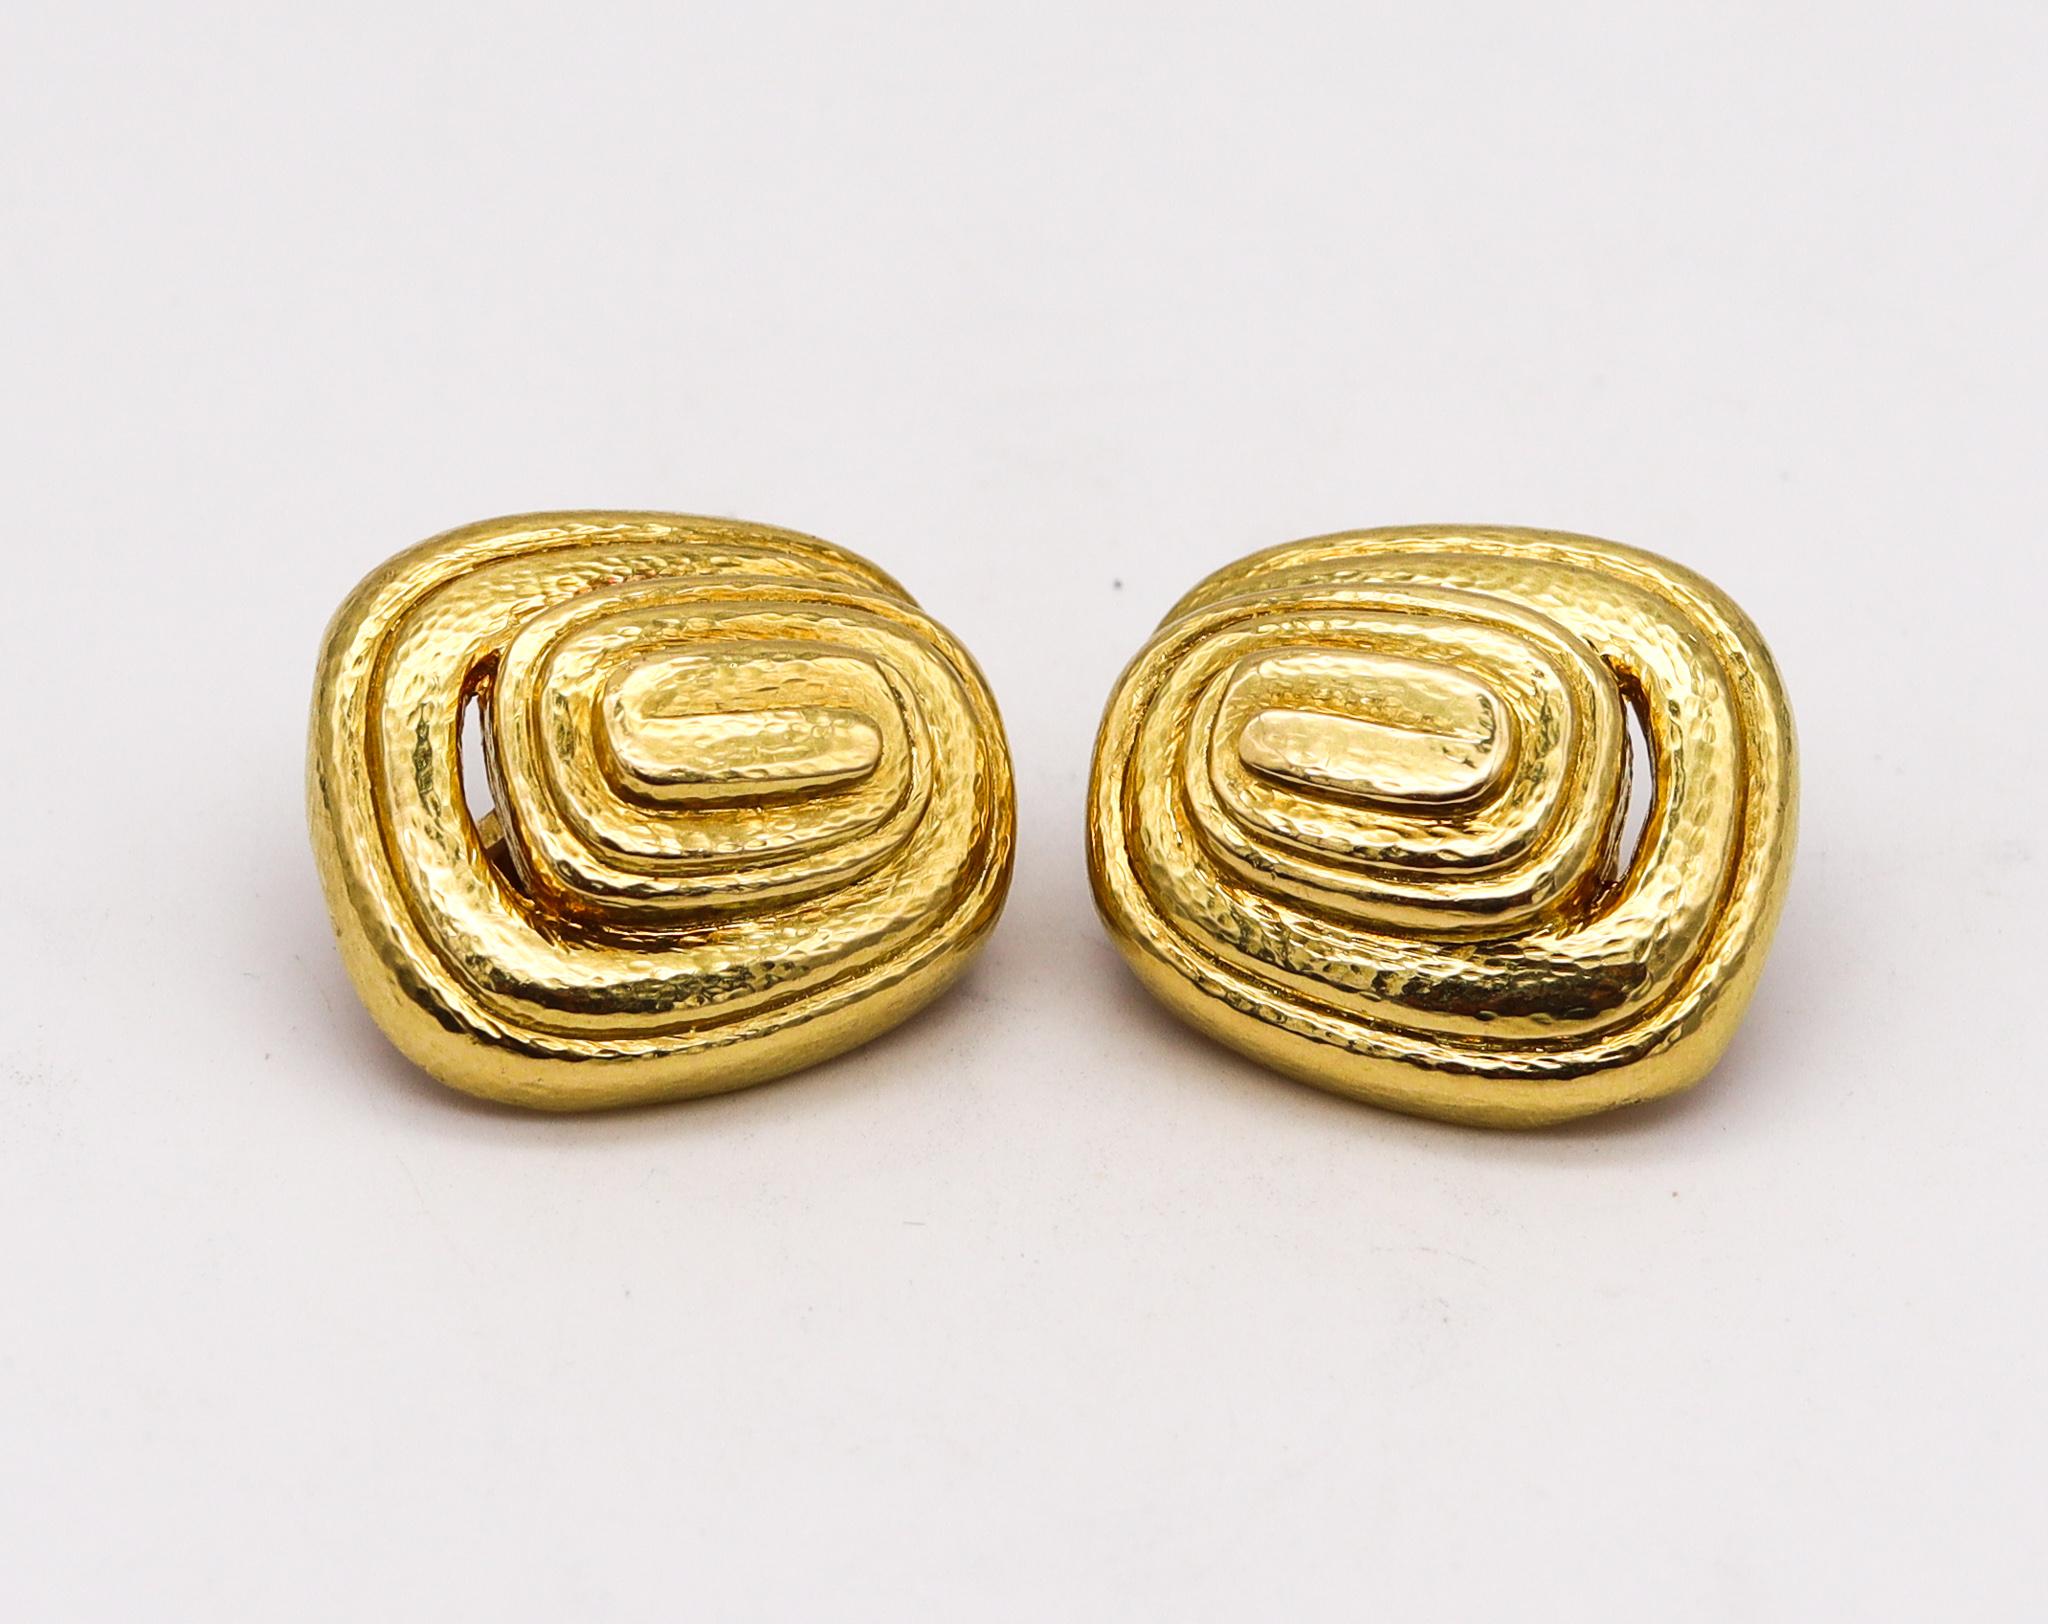 Pair of clips earrings designed by David Webb (1925-1975).

A vintage three-dimensional Mayan stepped pair, created in New York city at the atelier of David Webb, back in the 1970's. These pair of clip-On earrings was crafted in solid rich yellow